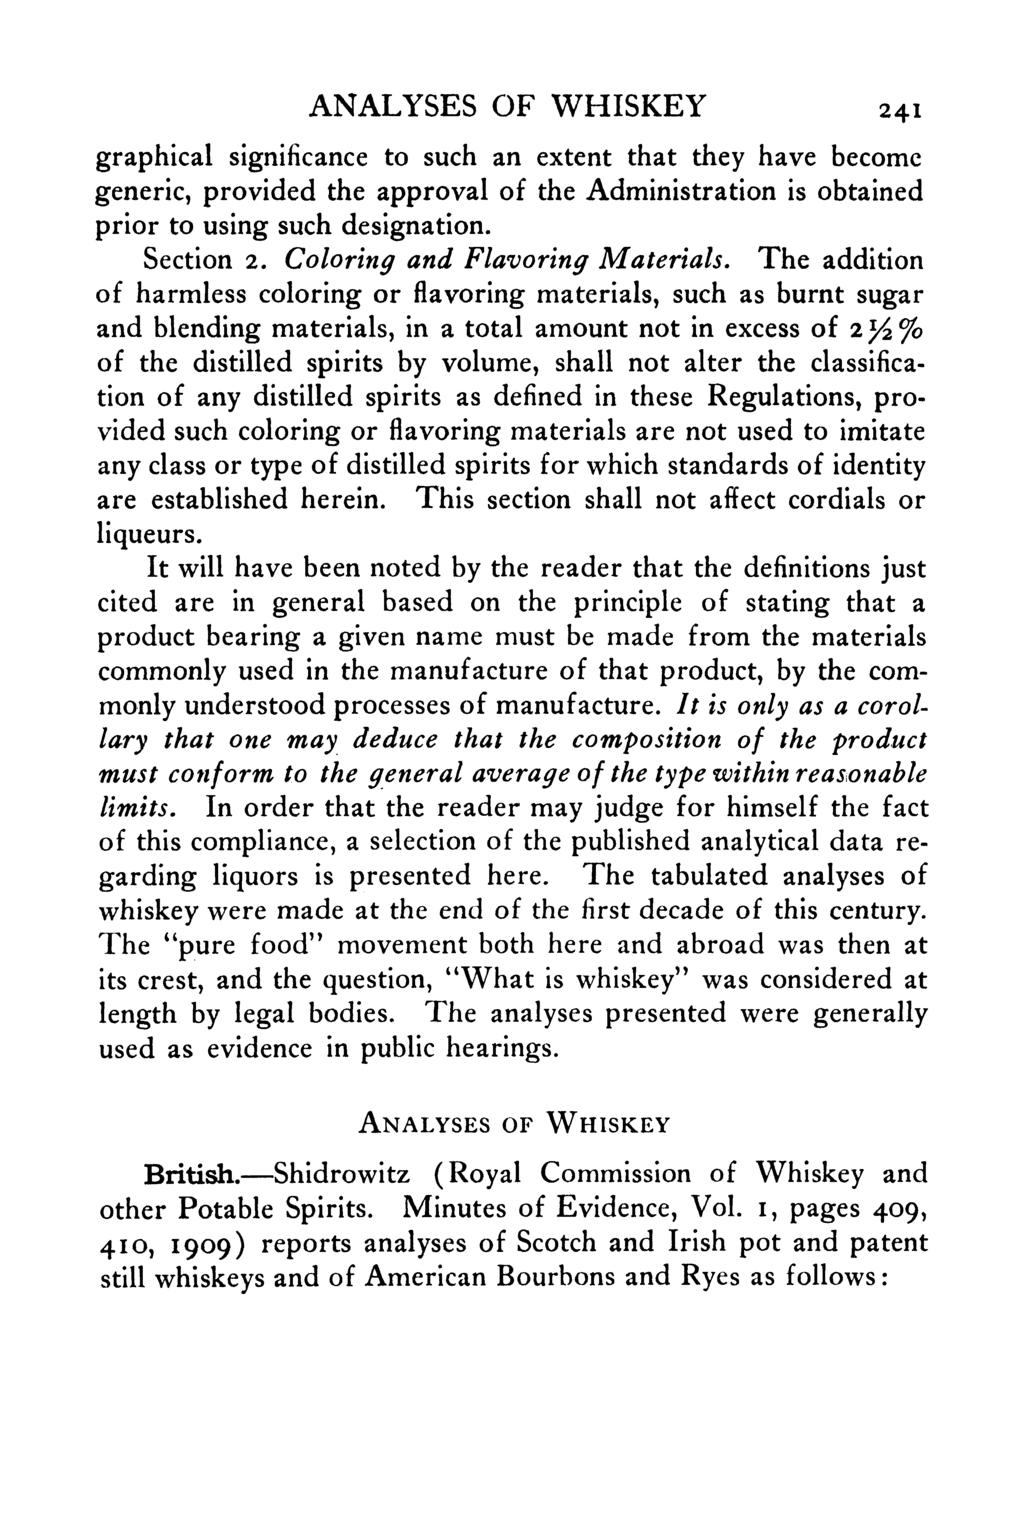 ANALYSES OF WHISKEY 241 graphical significance to such an extent that they have become generic, provided the approval of the Administration is obtained prior to using such designation. Section 2.